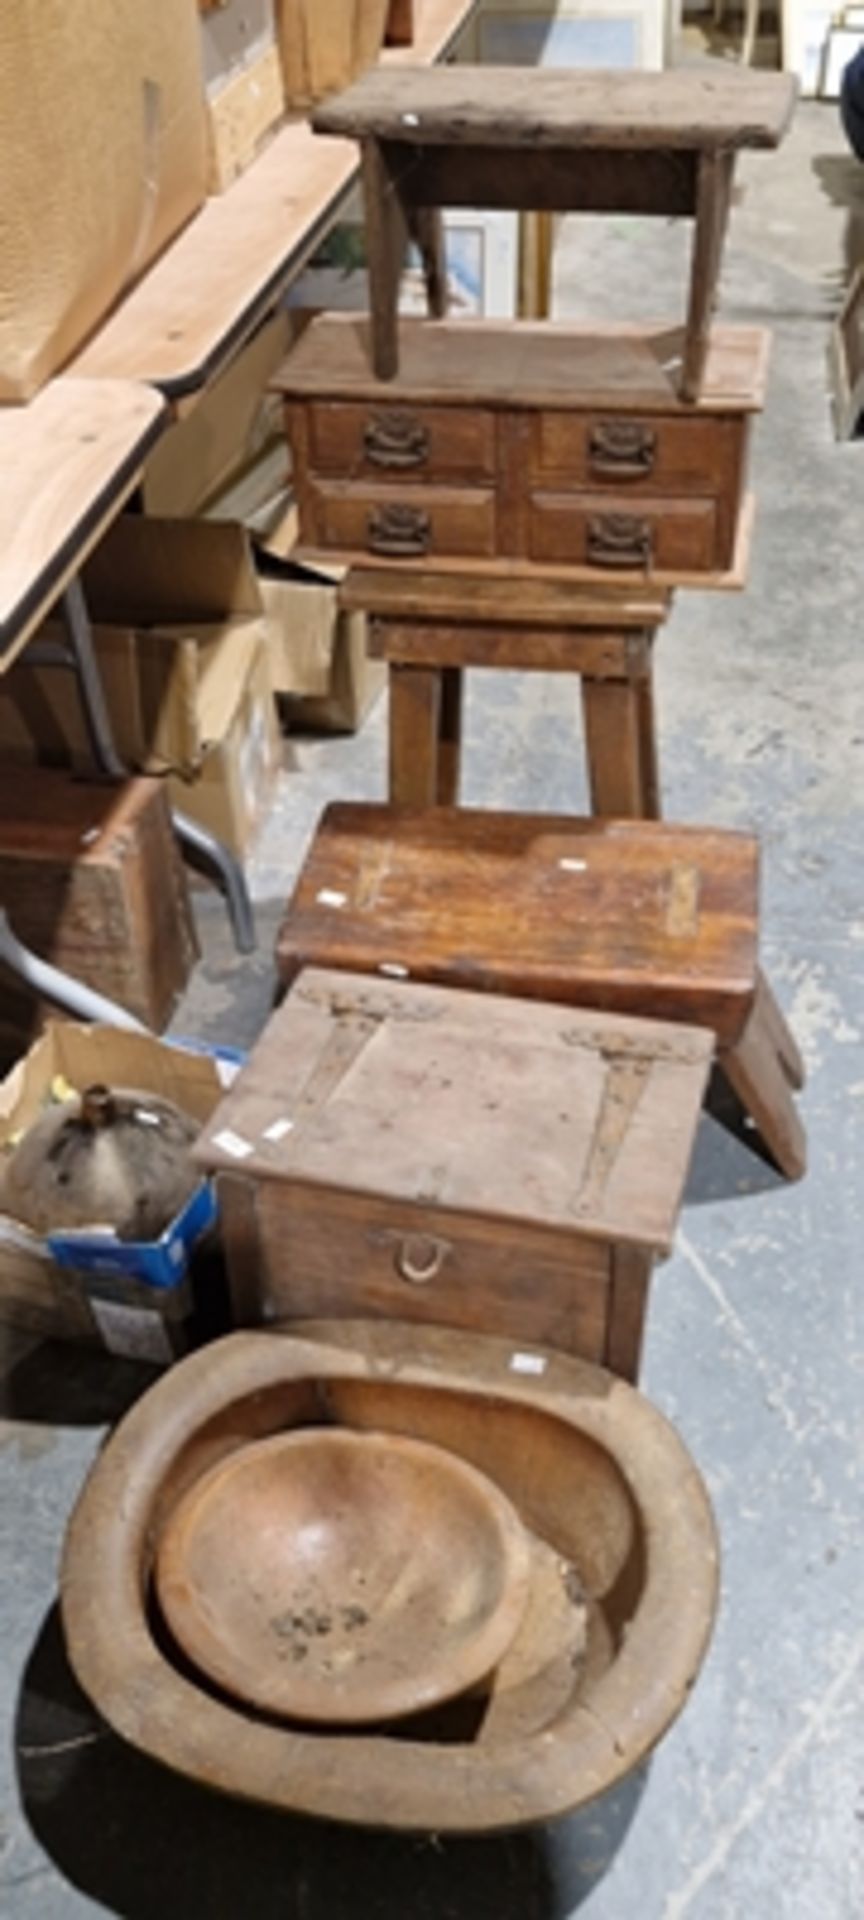 Two vintage stools, a wood and metal bound coal scuttle, a small wooden chest, a carved stand